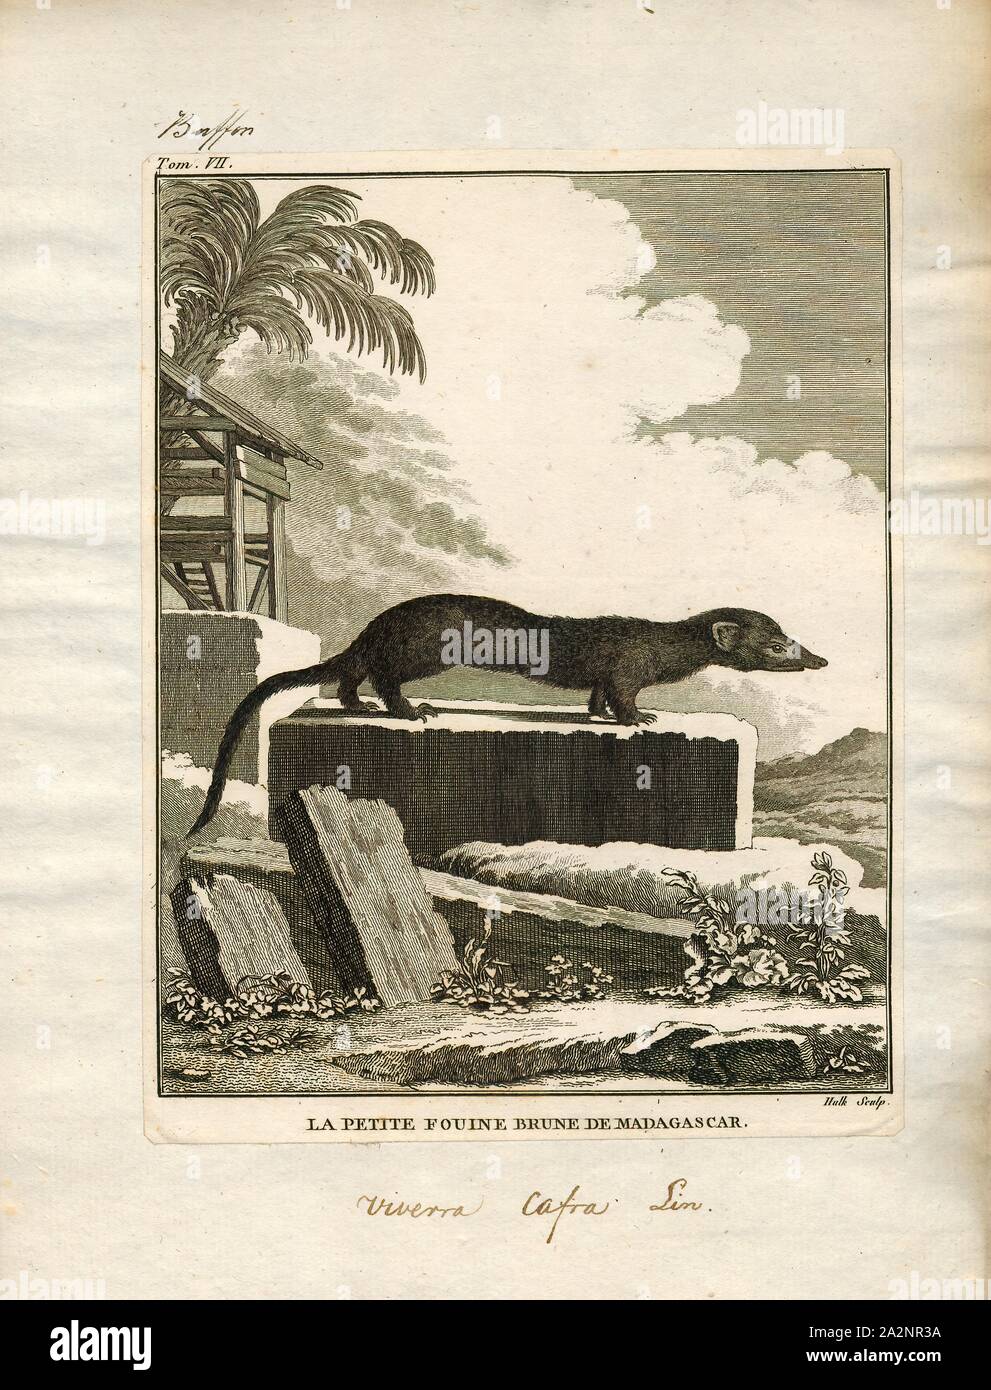 Viverra cafra, Print, Viverra is a mammalian genus that was first nominated and described by Carl Linnaeus in 1758 as comprising several species including the large Indian civet (V. zibetha). The genus was subordinated to the viverrid family by John Edward Gray in 1821., 1700-1880 Stock Photo